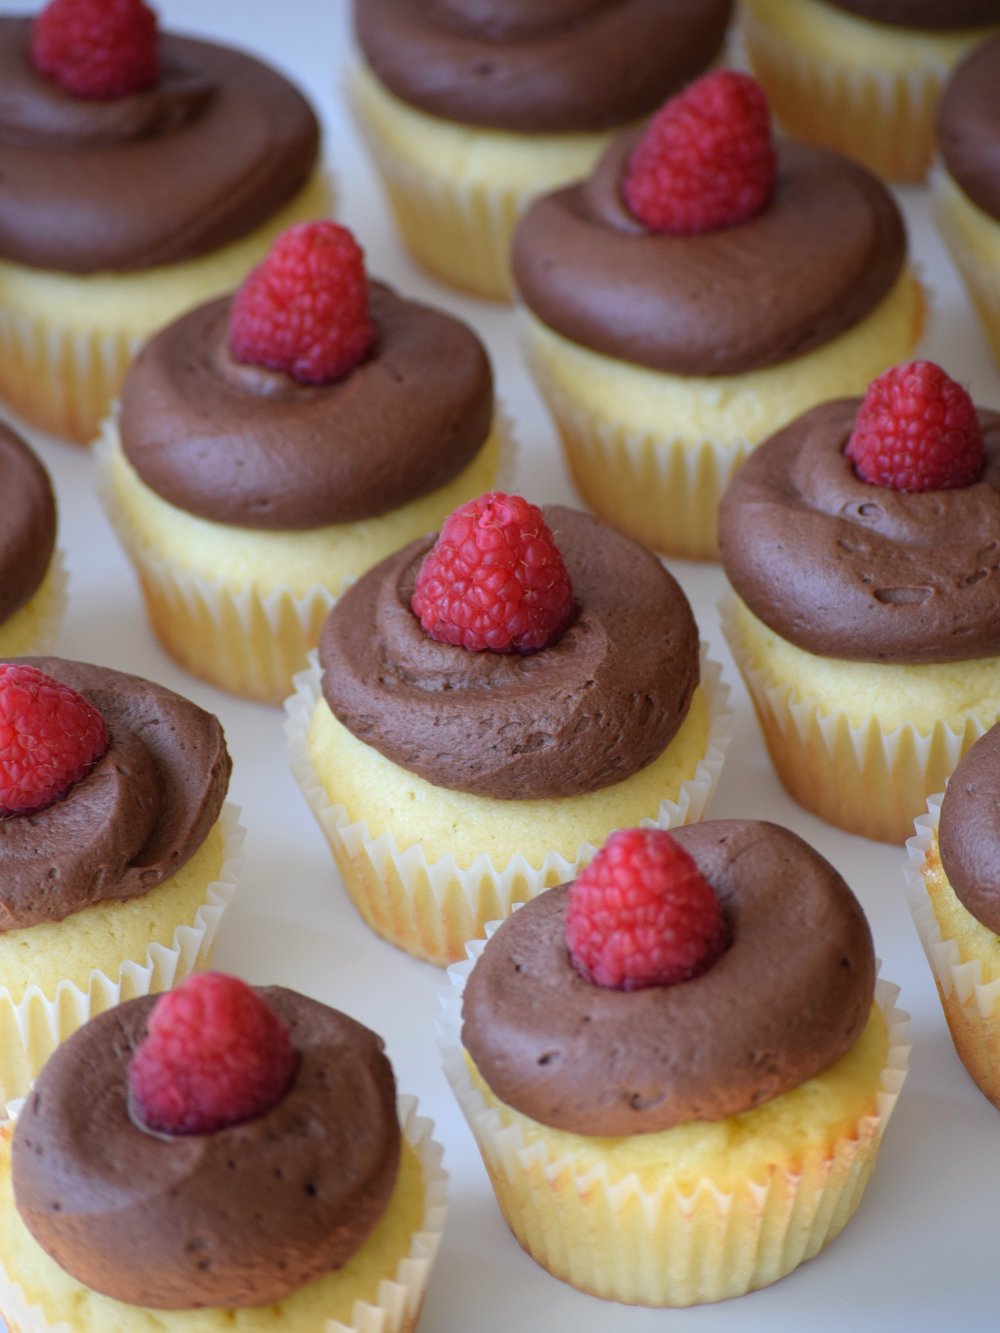 Vanilla Raspberry-Filled Cupcakes with Chocolate Cream Cheese Frosting